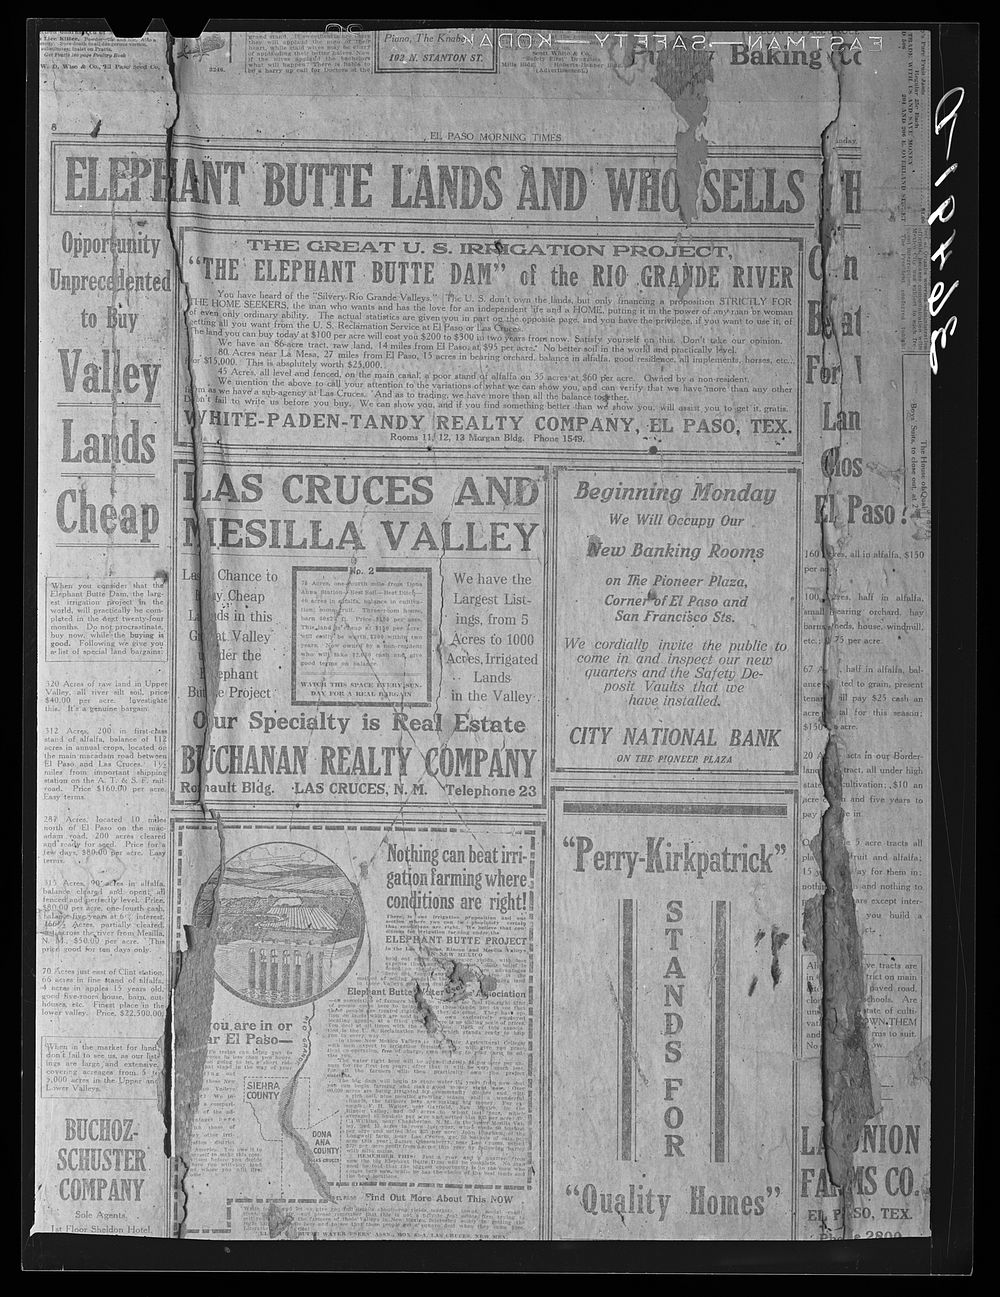 Old copy of El Paso Morning Times, about 1914, describing advantages of Elephant Butte Dam project and agricultural…